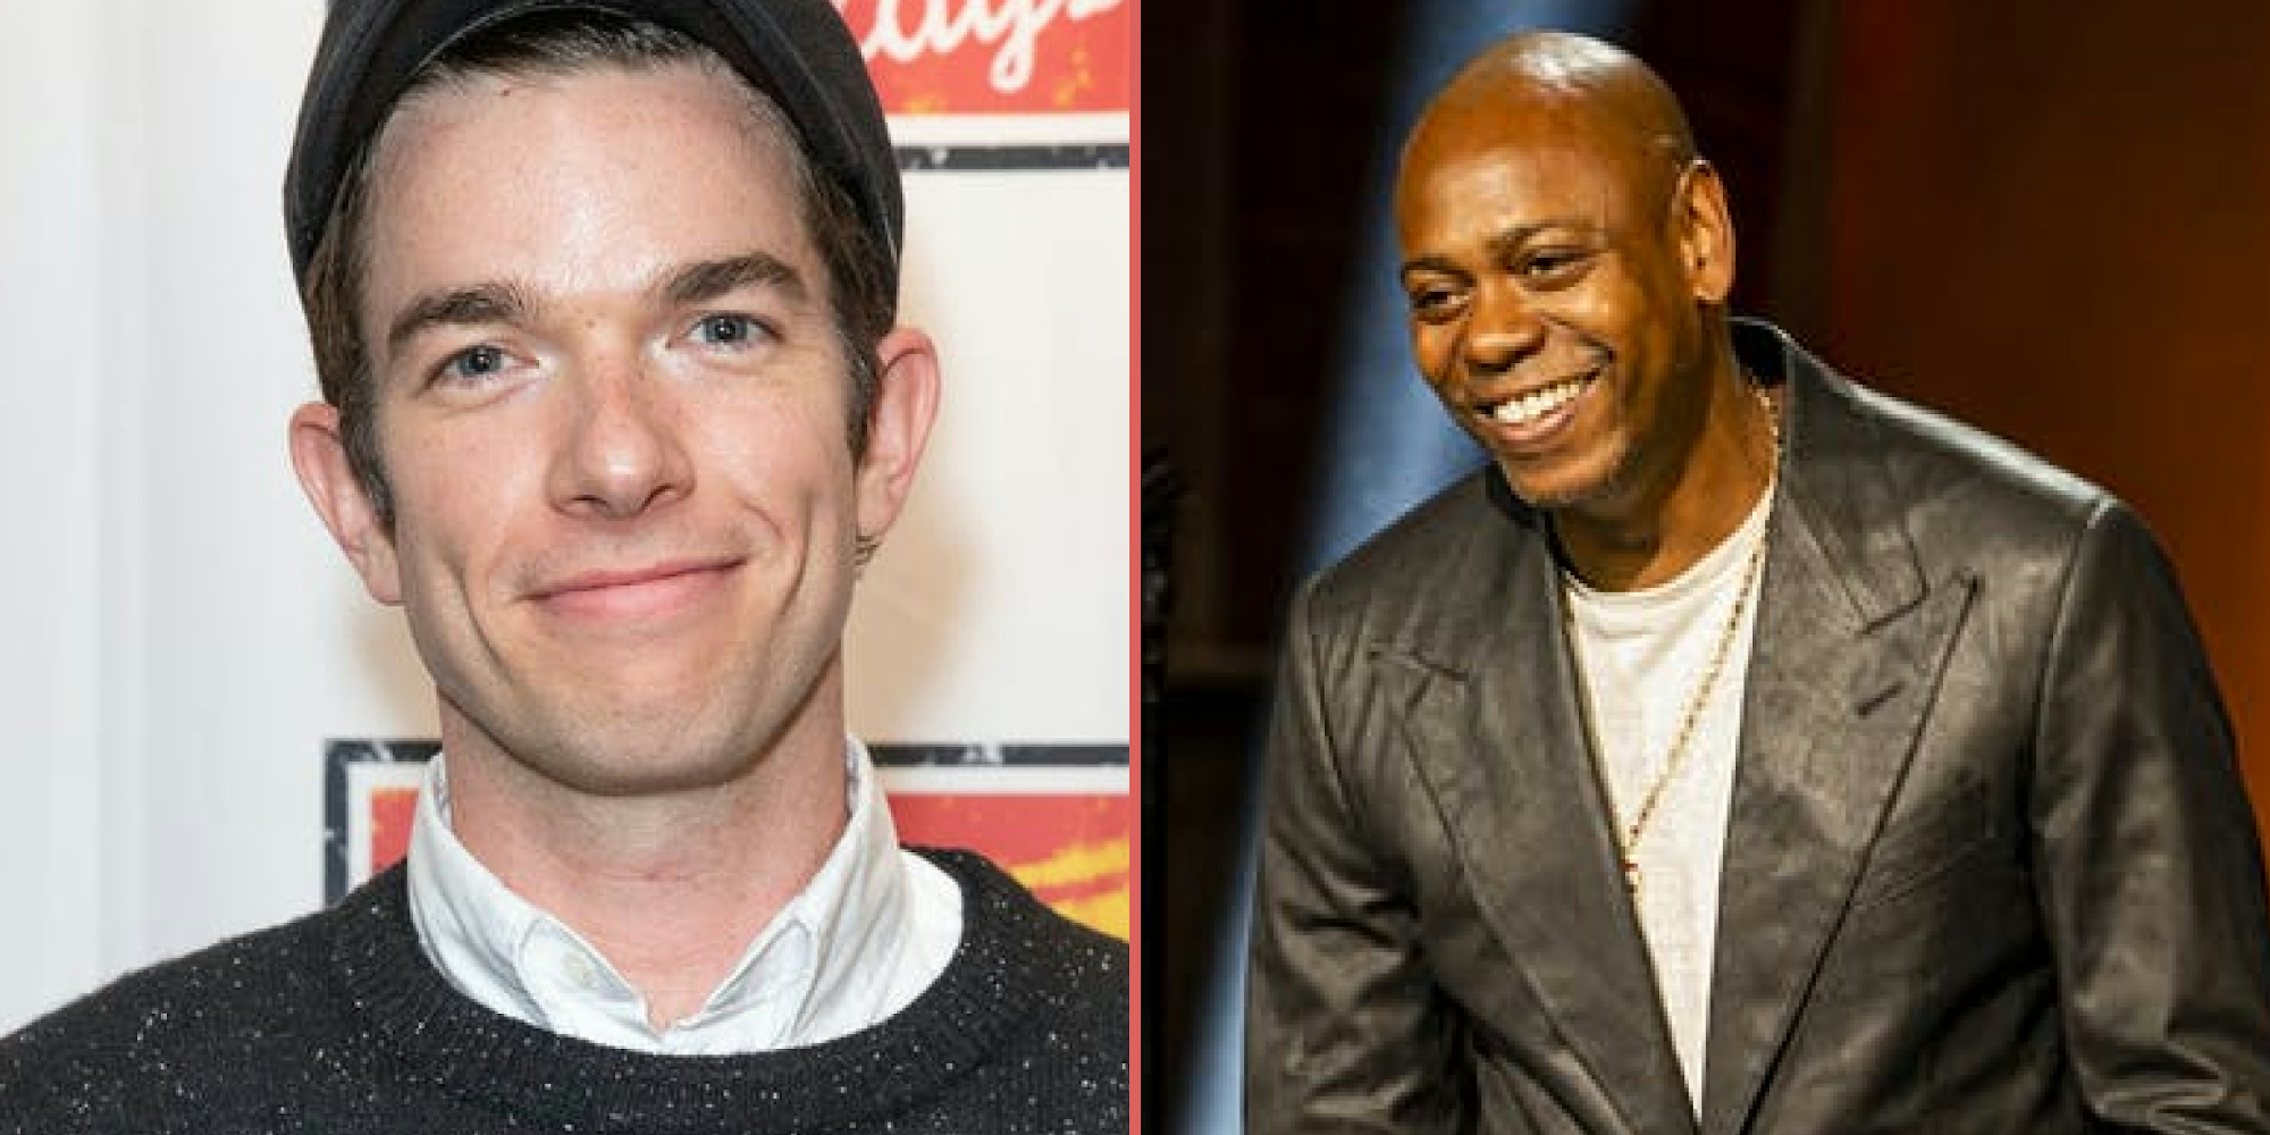 comedians john mulaney and dave chappelle, mulaney brought chappelle onstage as a surprise guest on tour